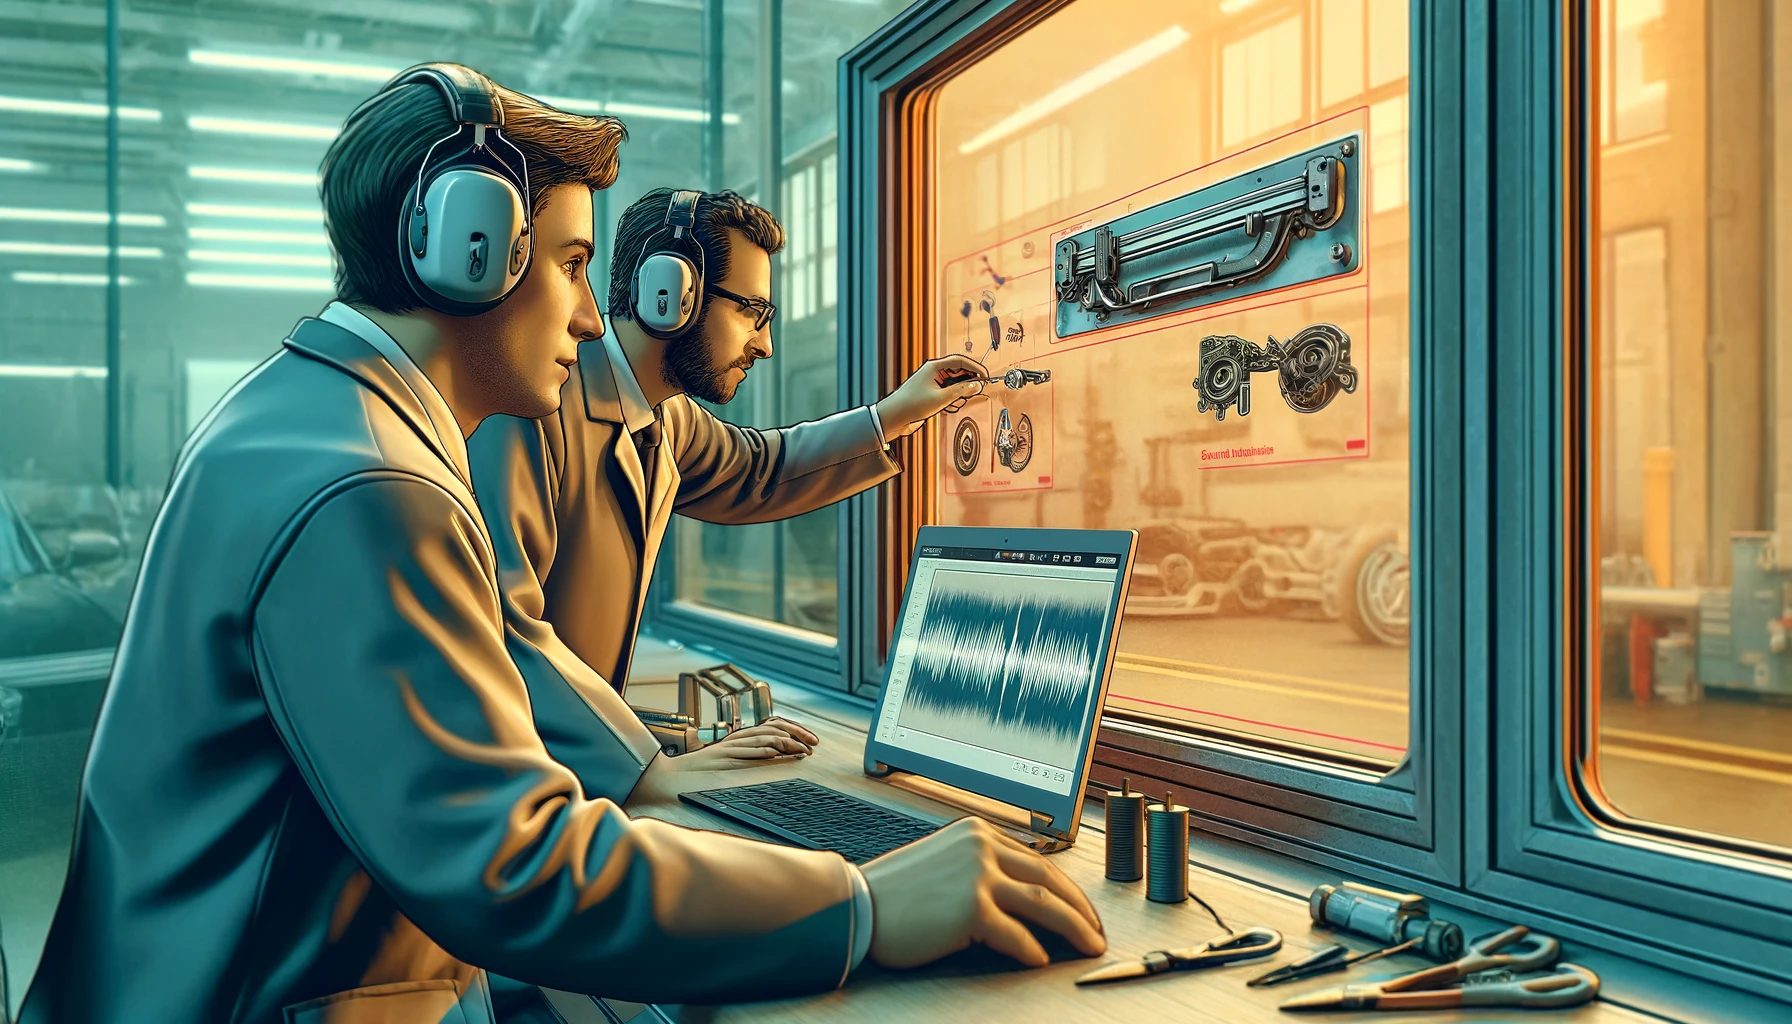 The scene depicts two engineers intently focused on analyzing the sound of a window regulator in operation, using headphones and monitoring real-time sound wave analysis on a computer screen. The setting is a detailed and practical workspace within an automotive testing facility, rendered with a professional color palette of light warm and cool tones.